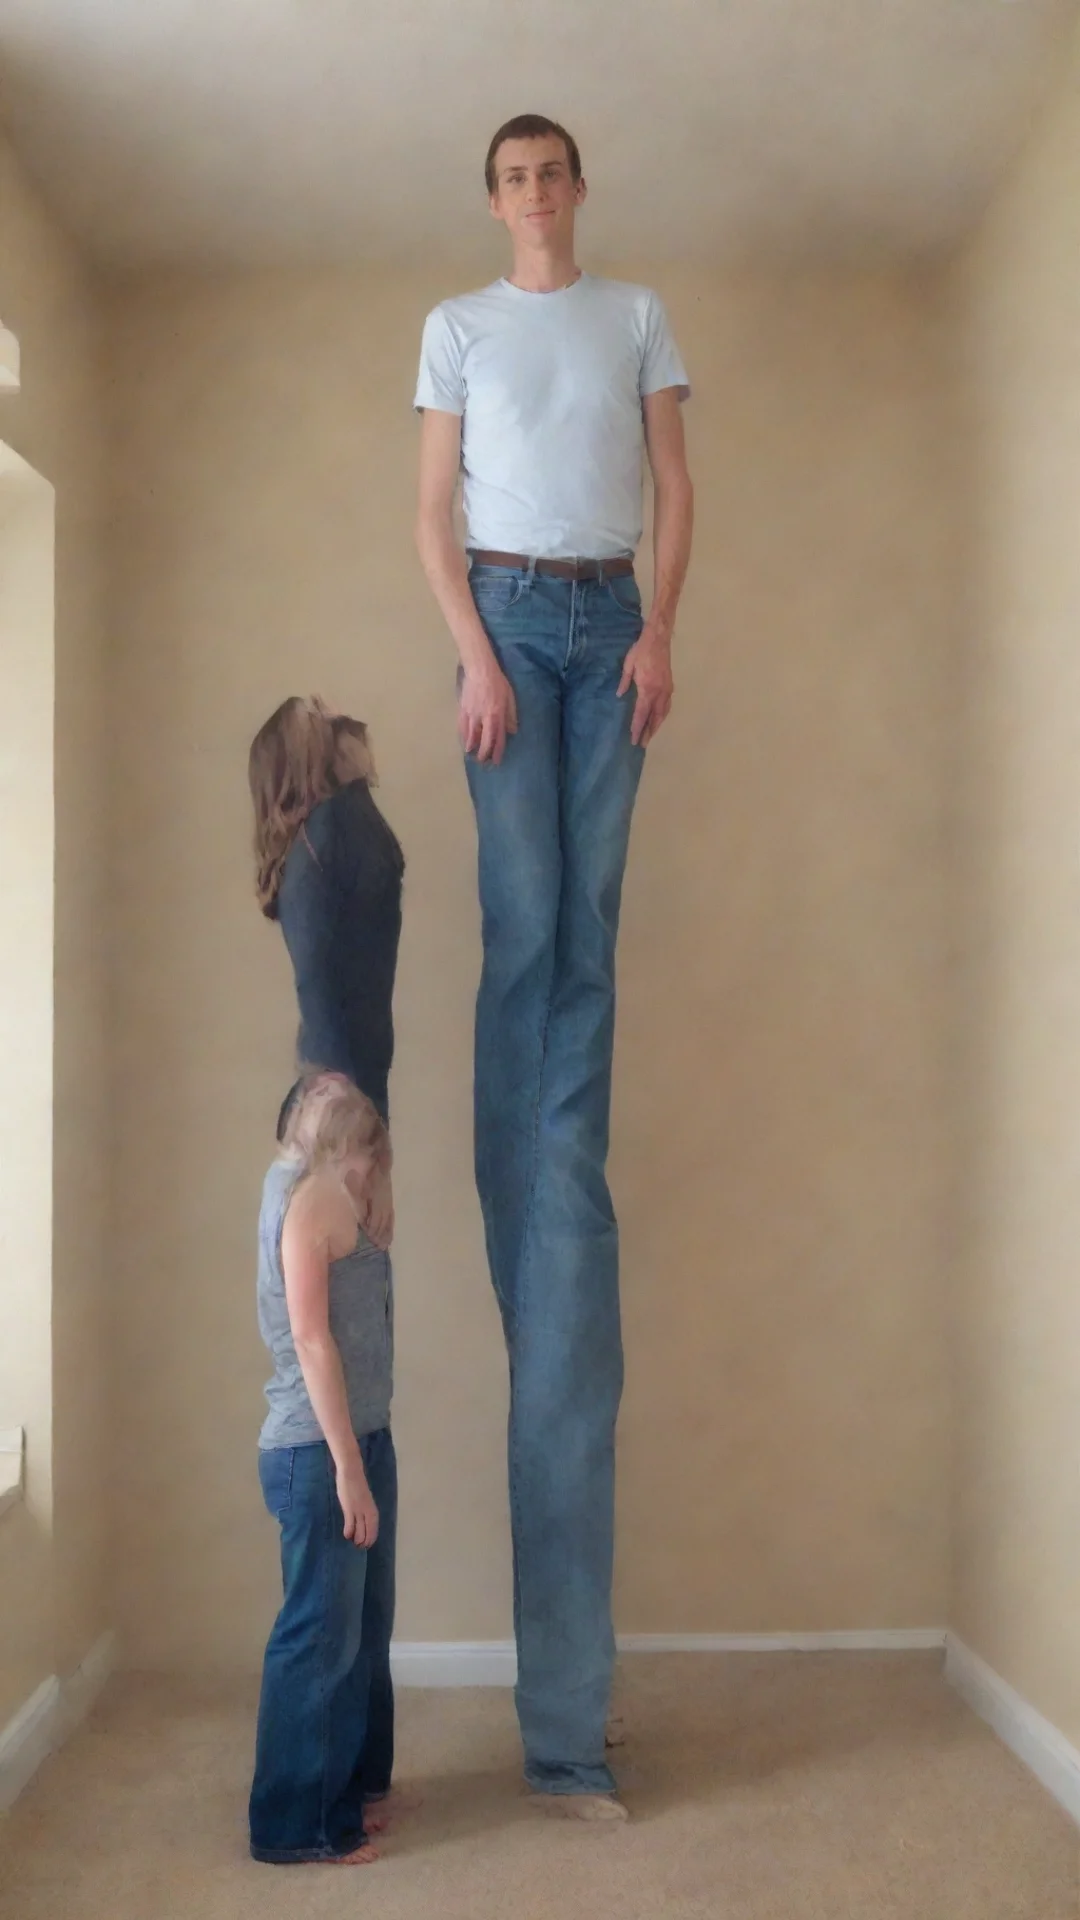 aiamazing extremely tall girl towering over her parents awesome portrait 2 tall